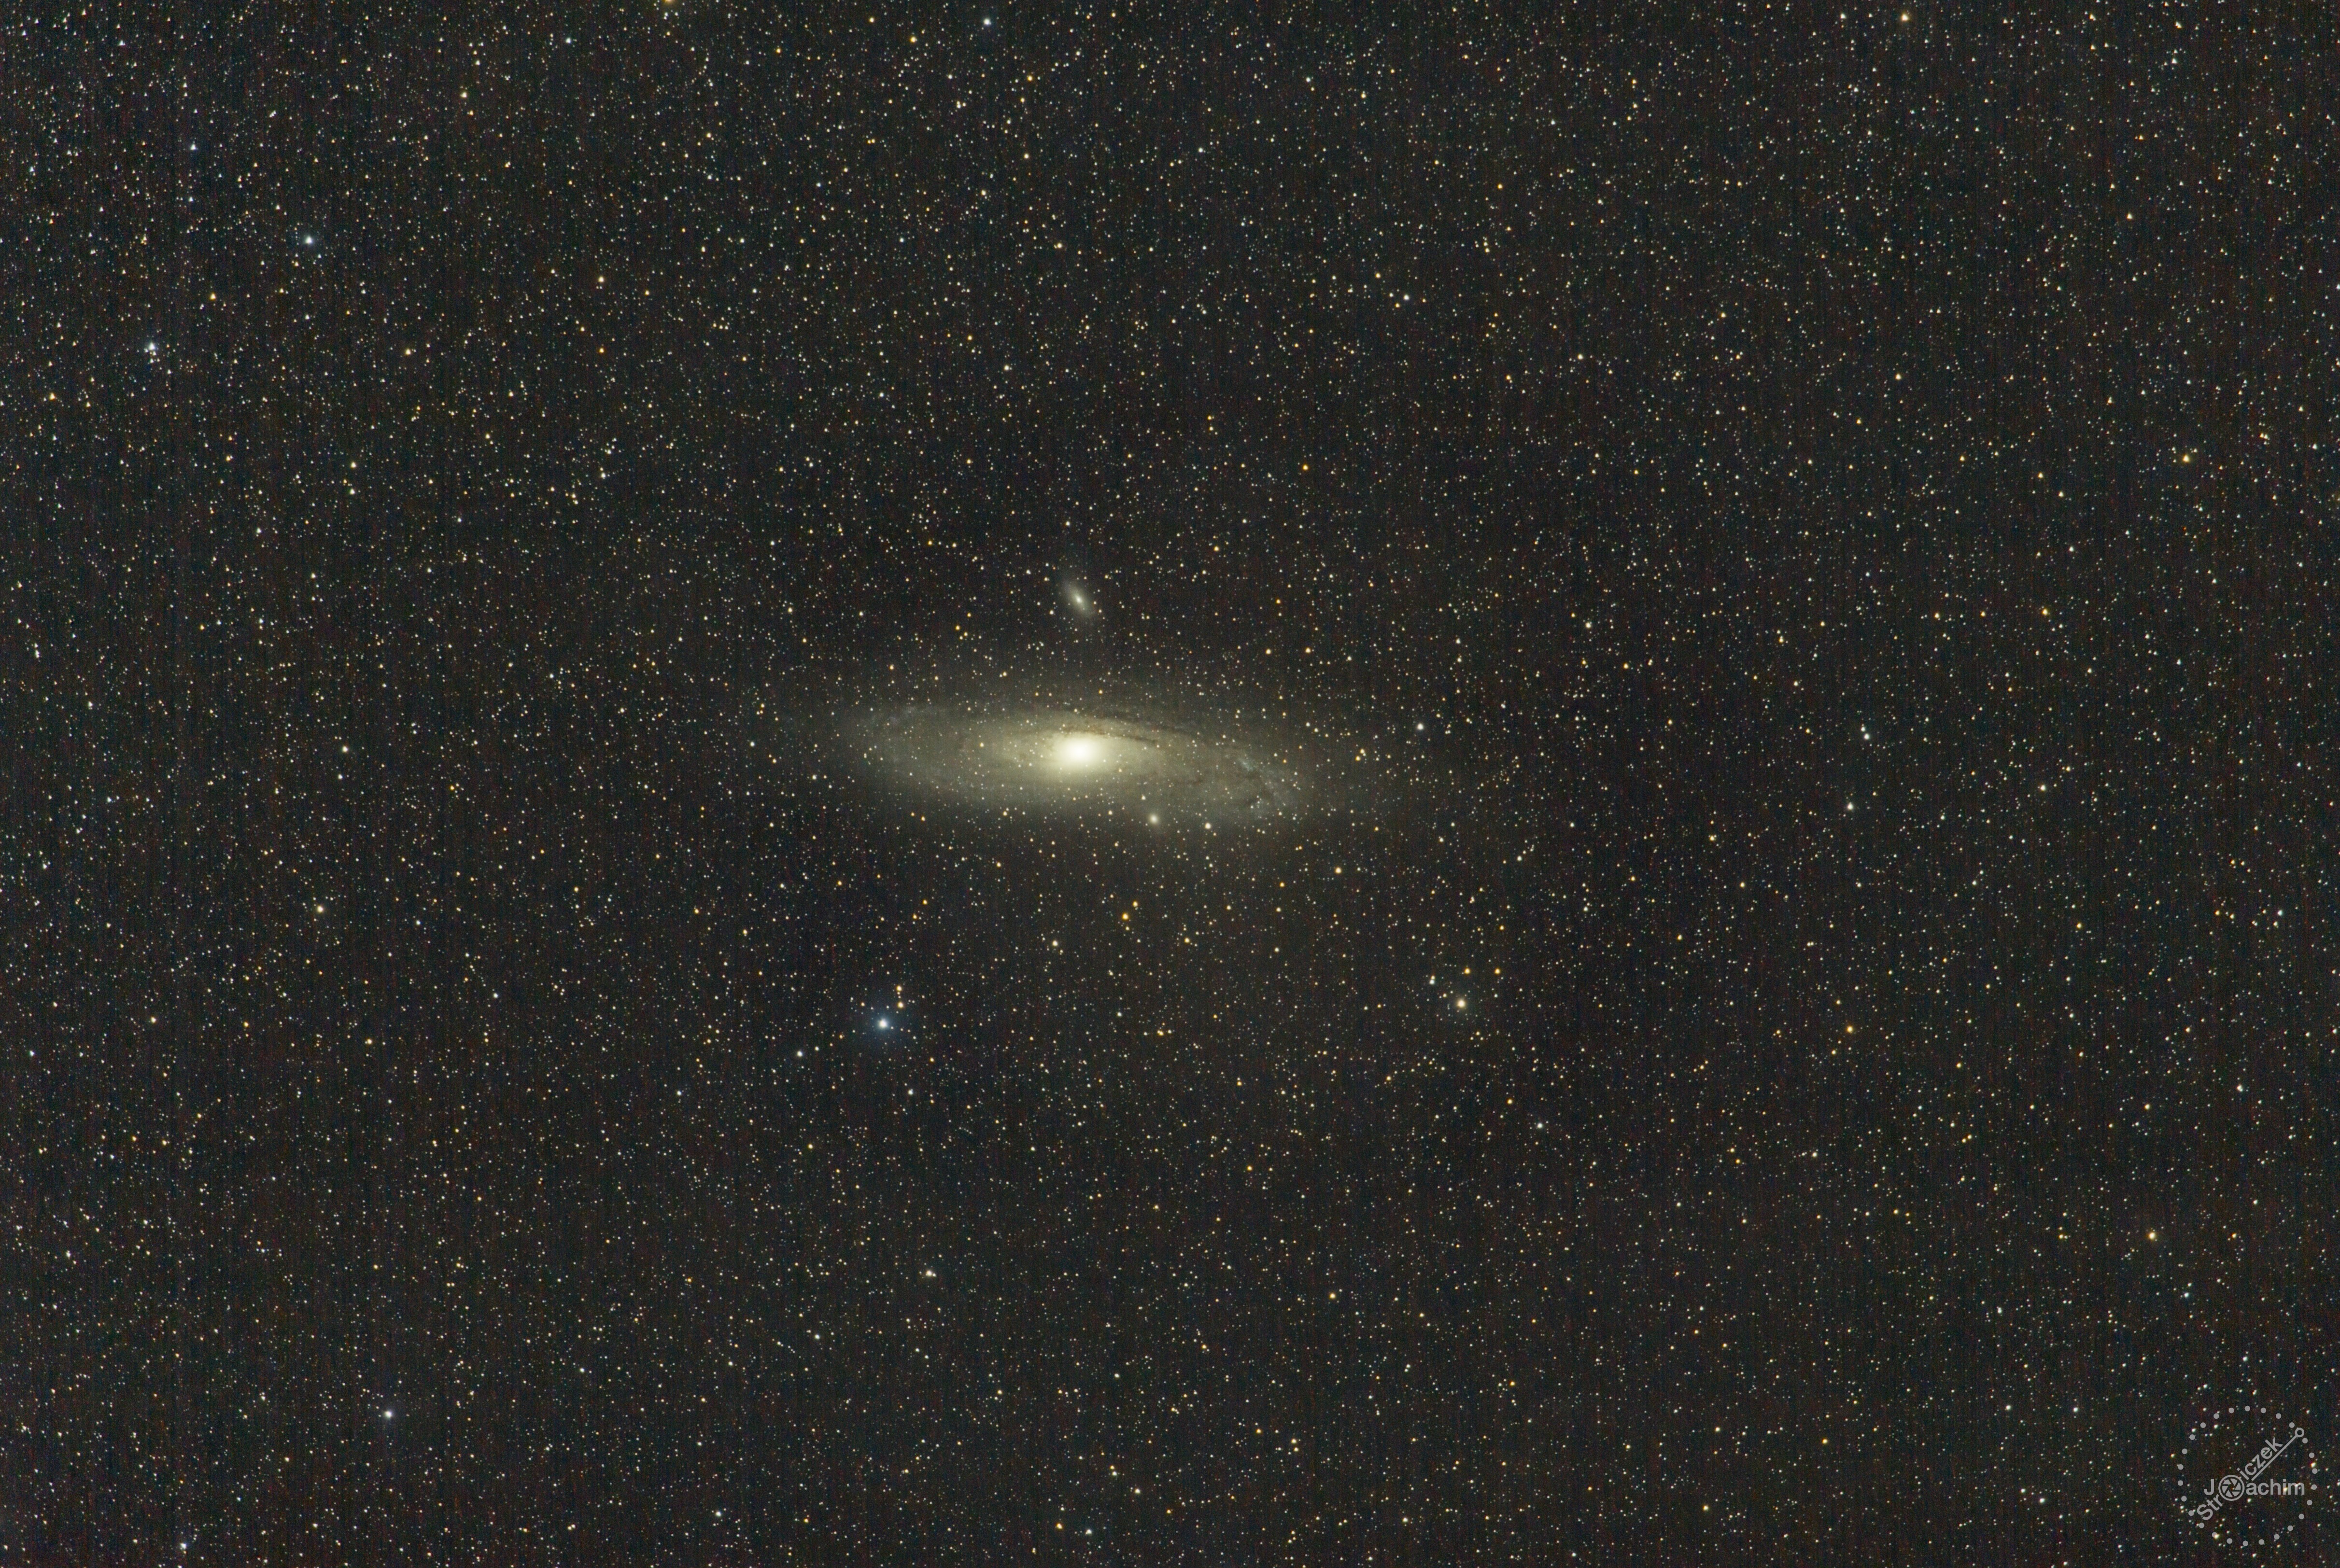 M 31 Andromeda-Galaxie | 3.9.2021 | Canon 6D auf iOptron Astro-Tracker | Canon EF 70-200mm | ISO1000, 80x60s